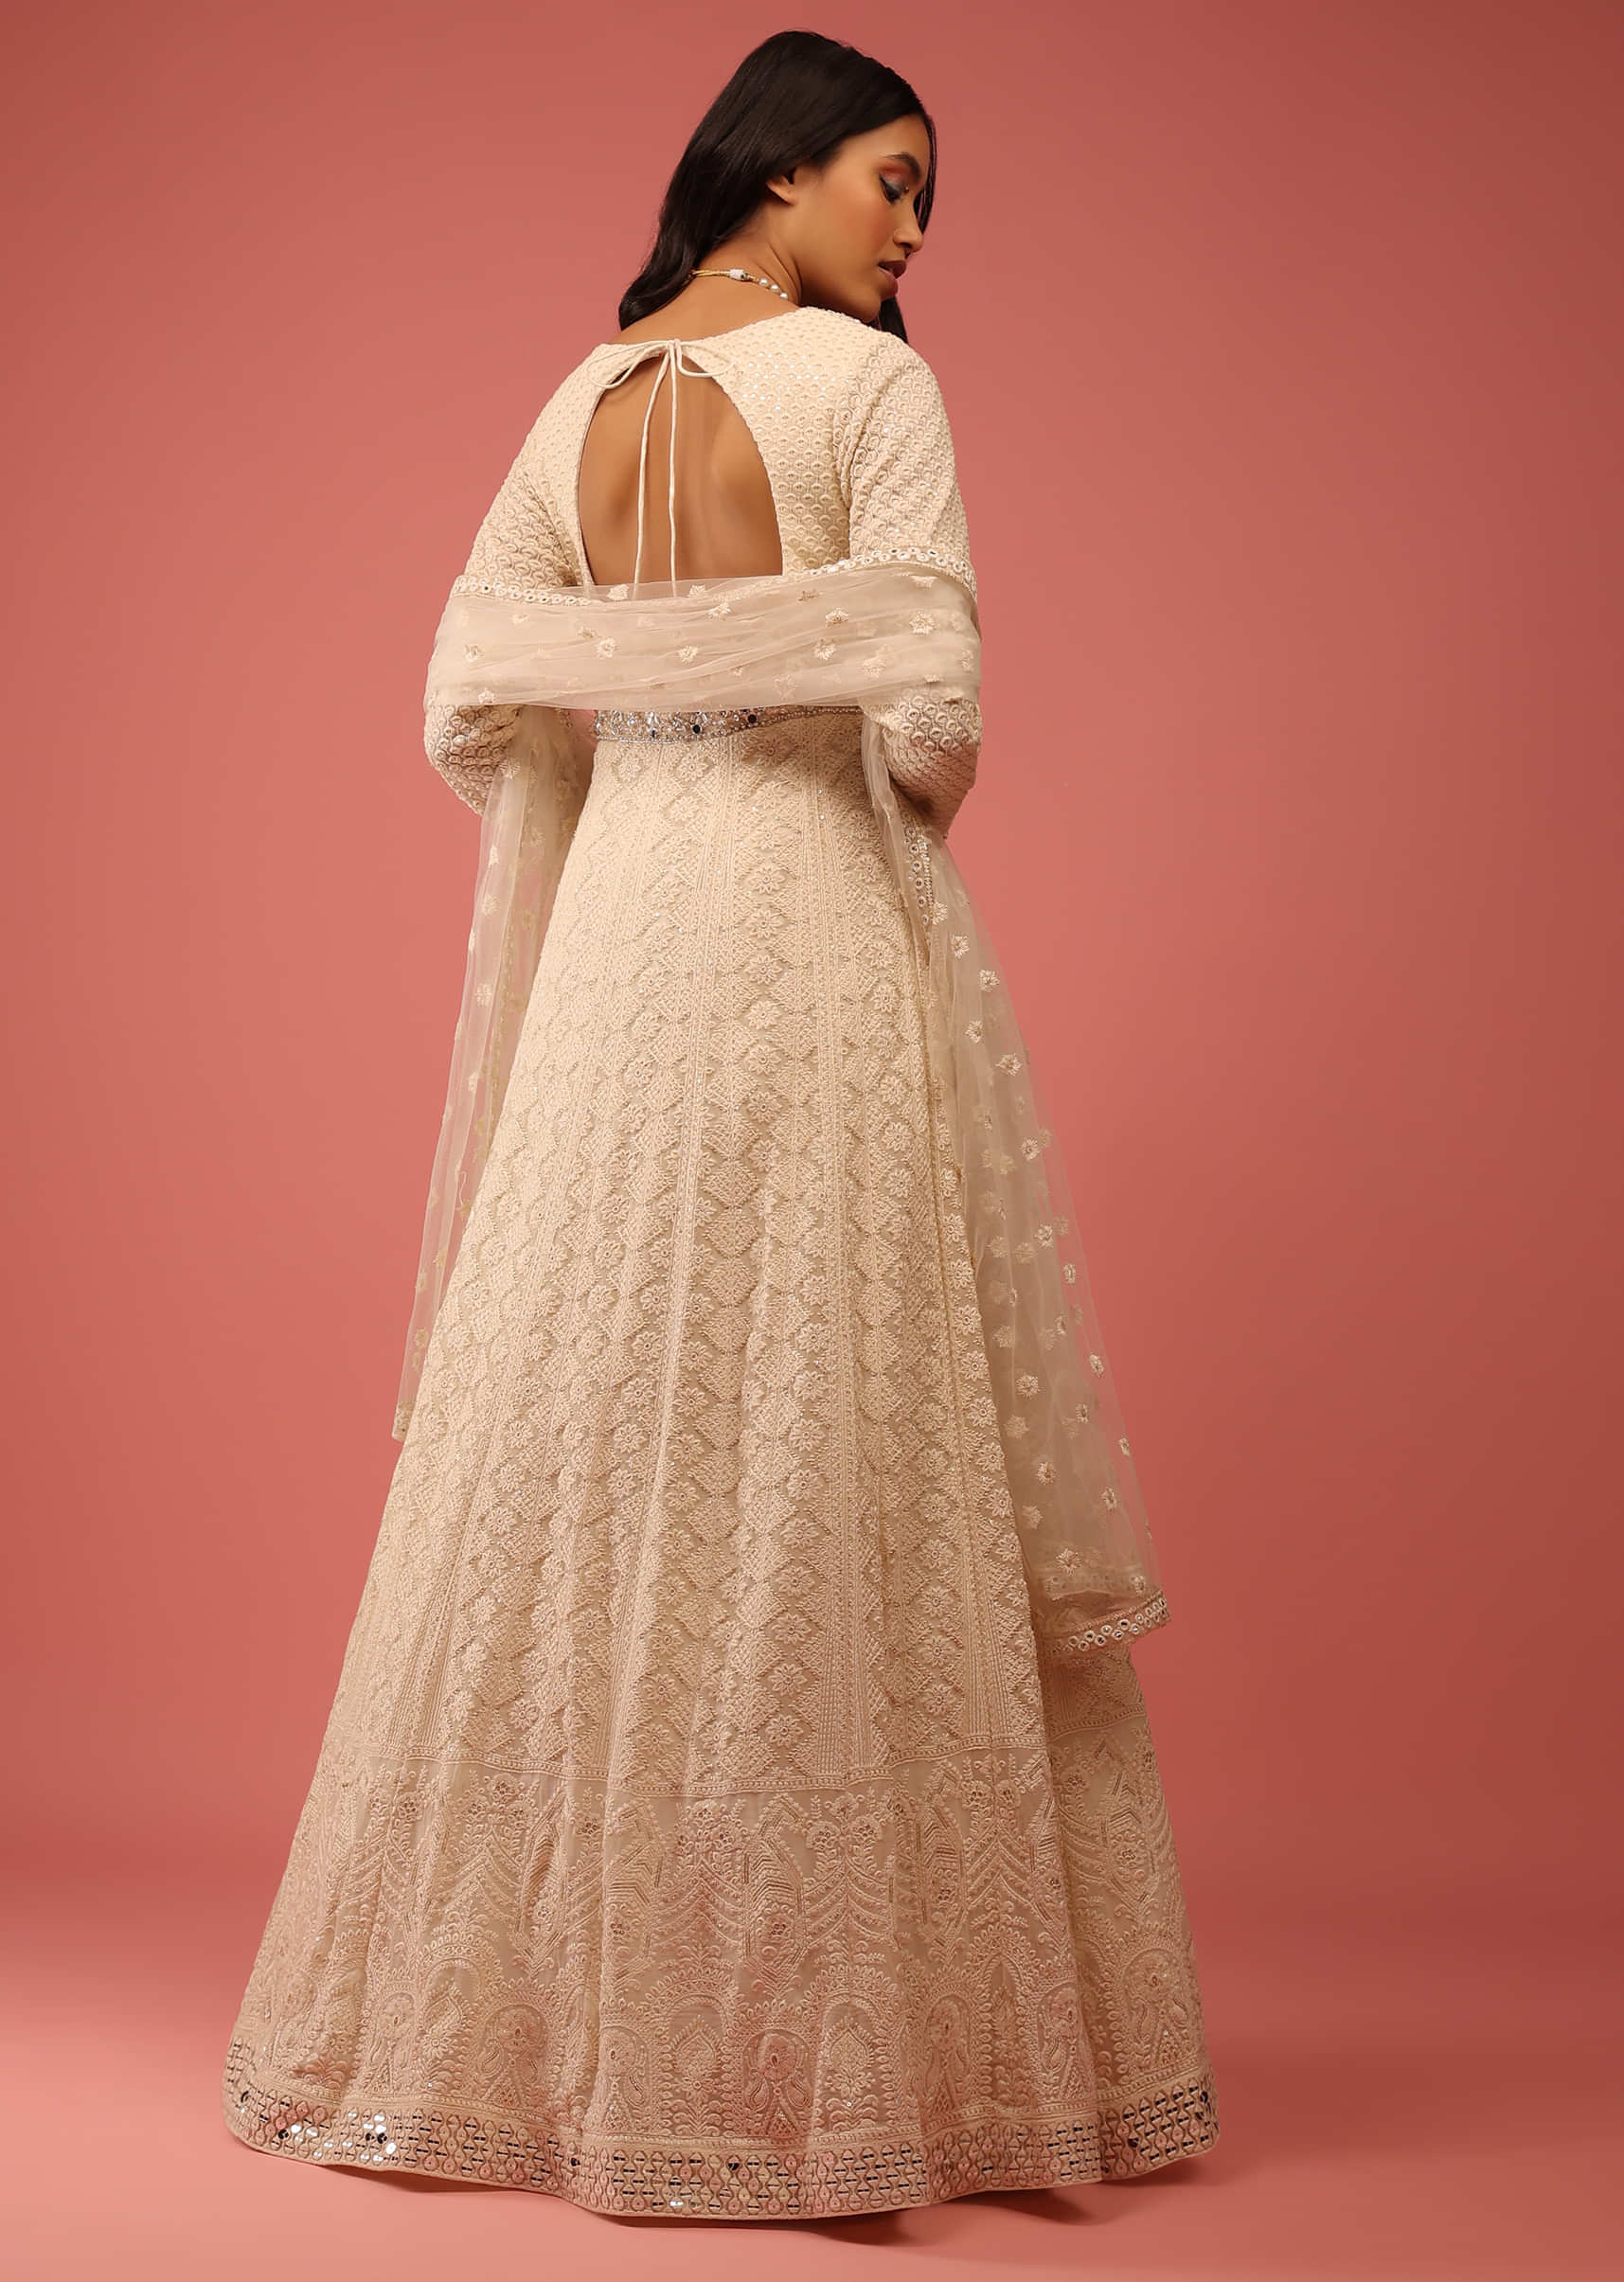 Off White Anarkali Suit In Georgette With Lucknowi Thread Embroidered Kalis And Mughal Border